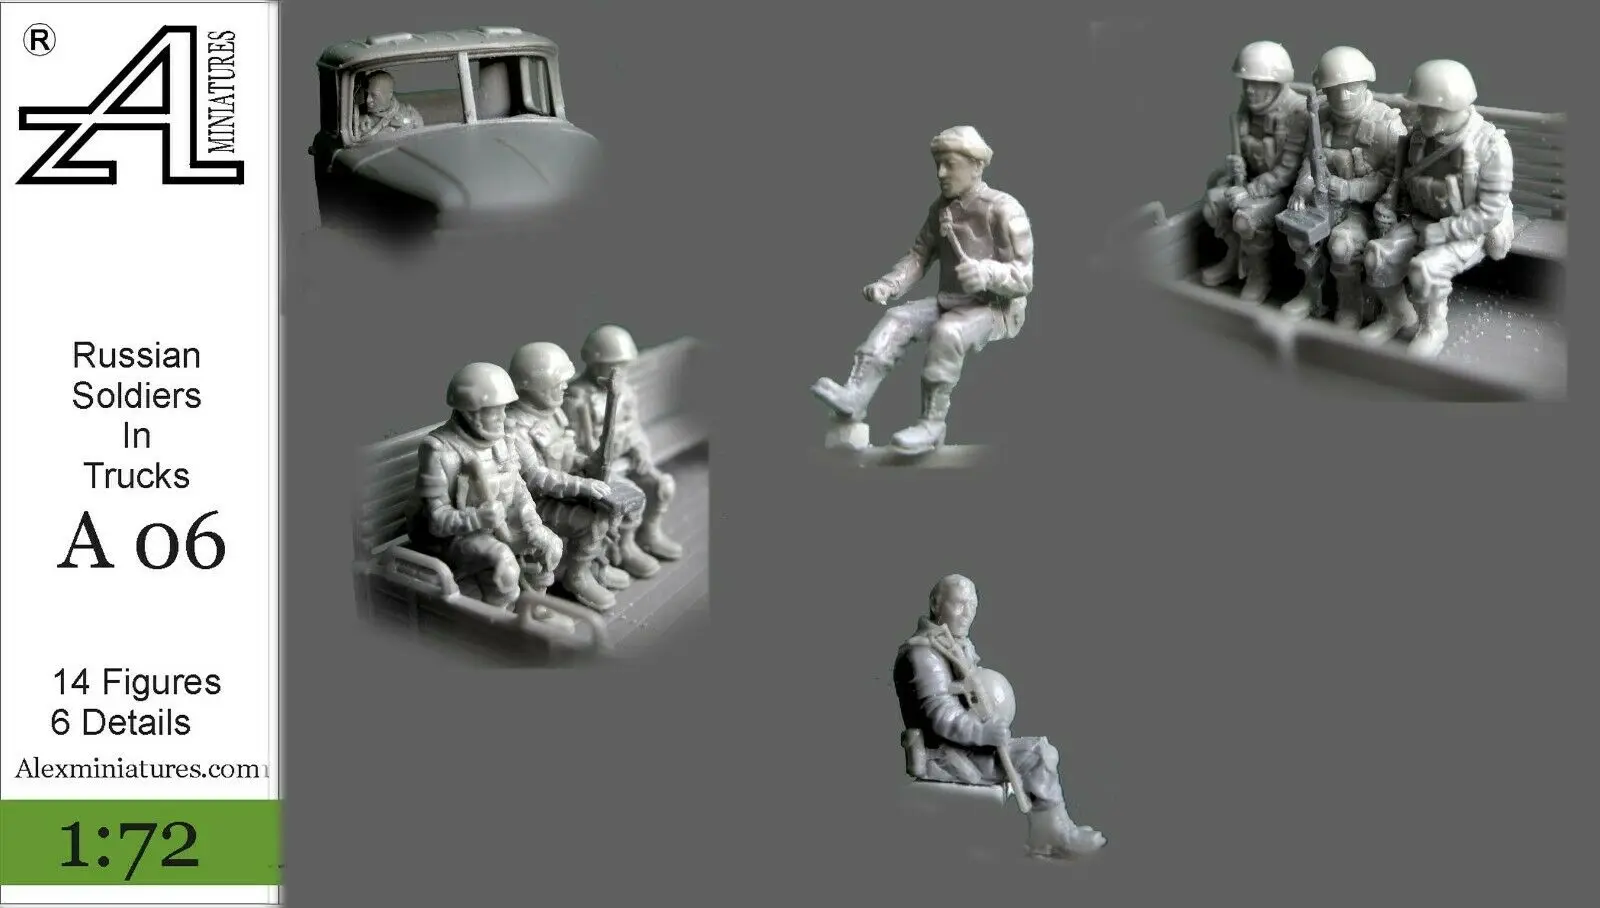 

1/72 Scale Die-cast Resin Figure Russian Soldier Scene Layout Model Assembly Package Free Shipping (unpainted)